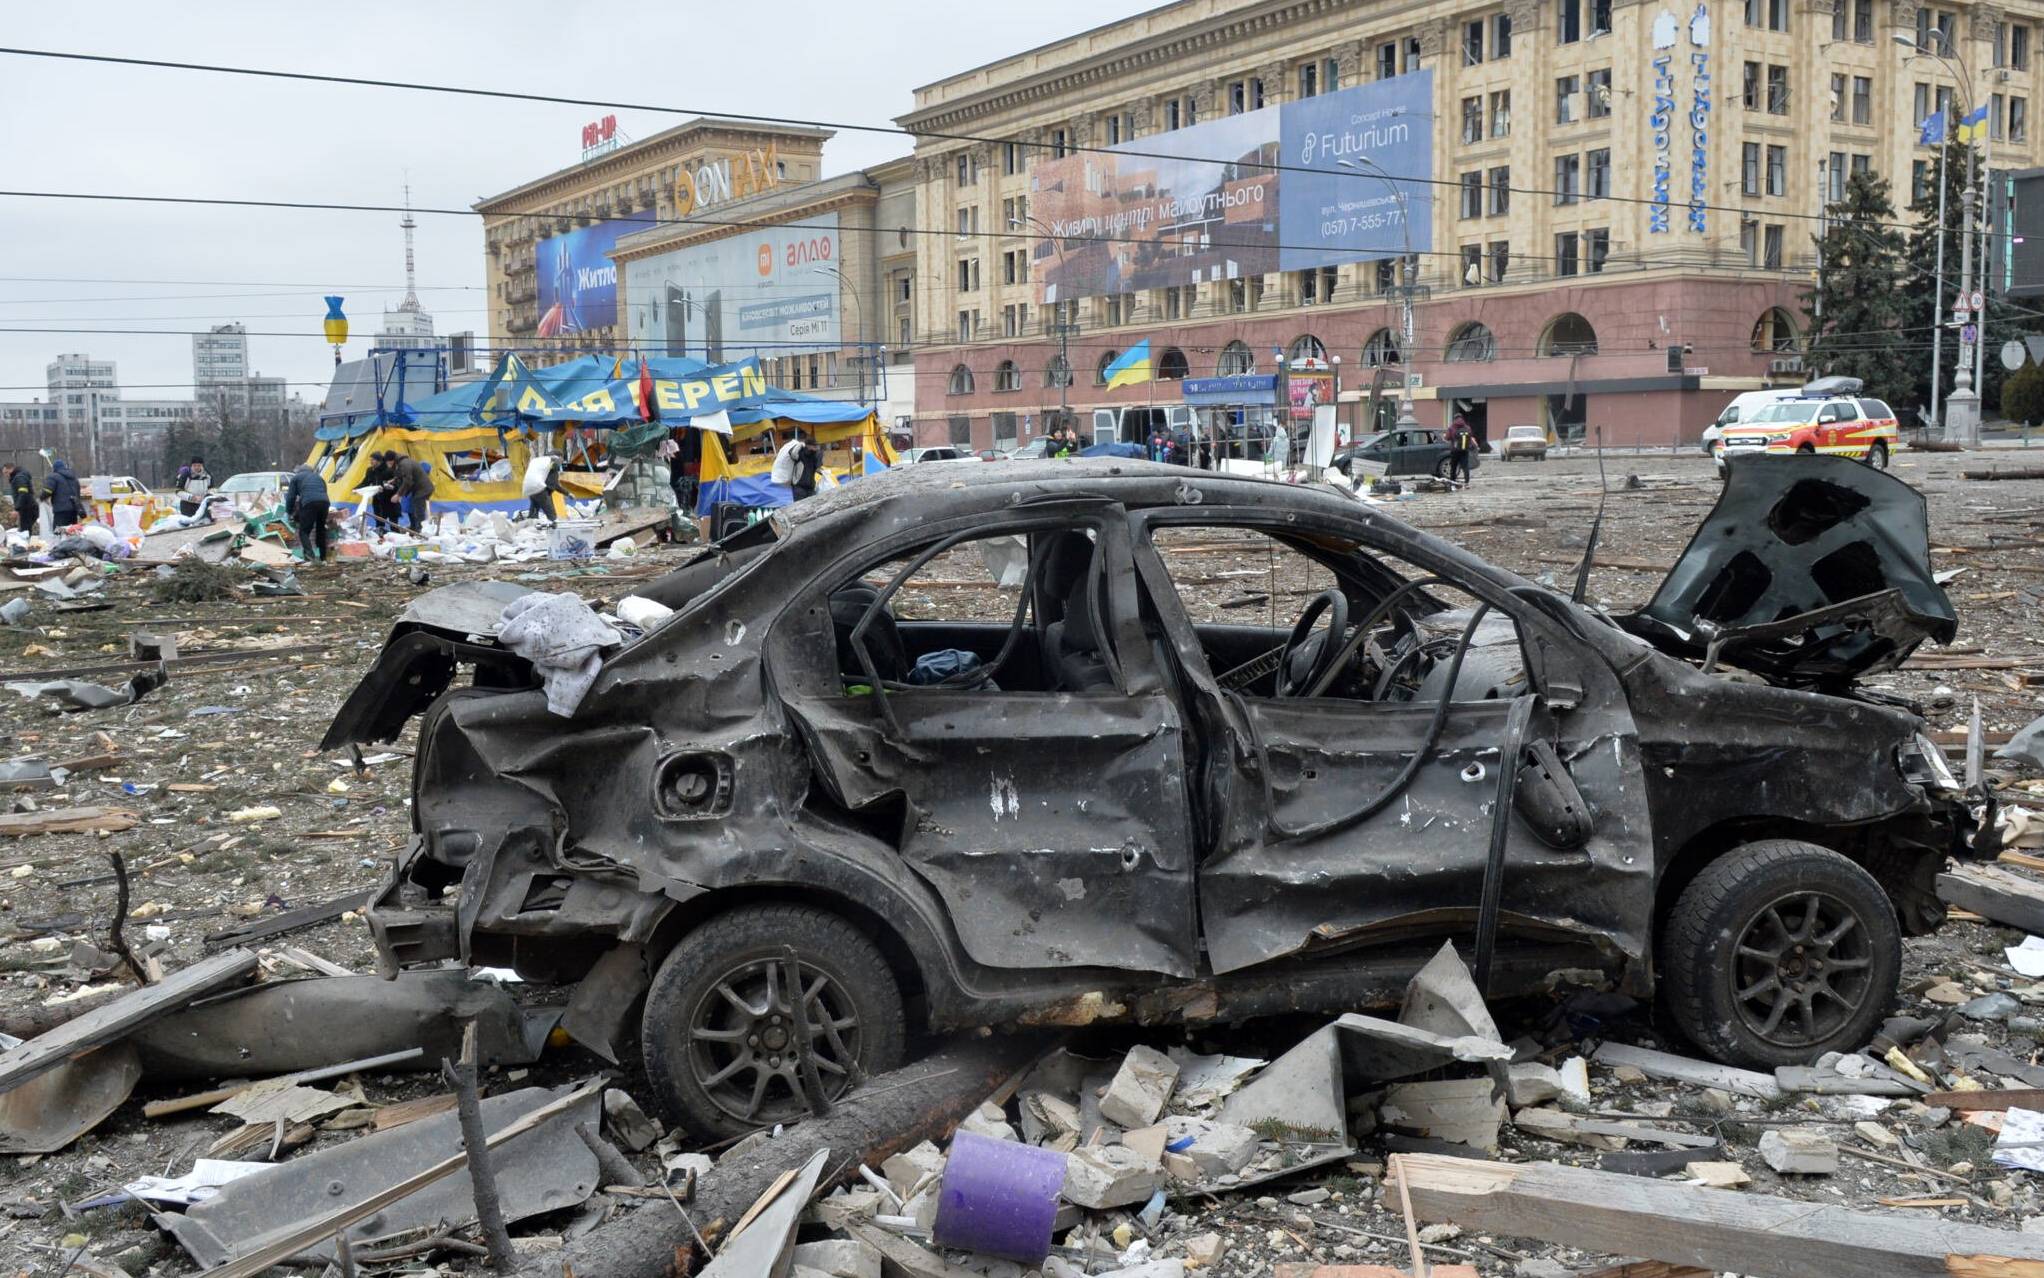 A view of the square outside the damaged local city hall of Kharkiv on March 1, 2022, destroyed as a result of Russian troop shelling. - The central square of Ukraine's second city, Kharkiv, was shelled by advancing Russian forces who hit the building of the local administration, regional governor Oleg Sinegubov said. Kharkiv, a largely Russian-speaking city near the Russian border, has a population of around 1.4 million. (Photo by Sergey BOBOK / AFP)